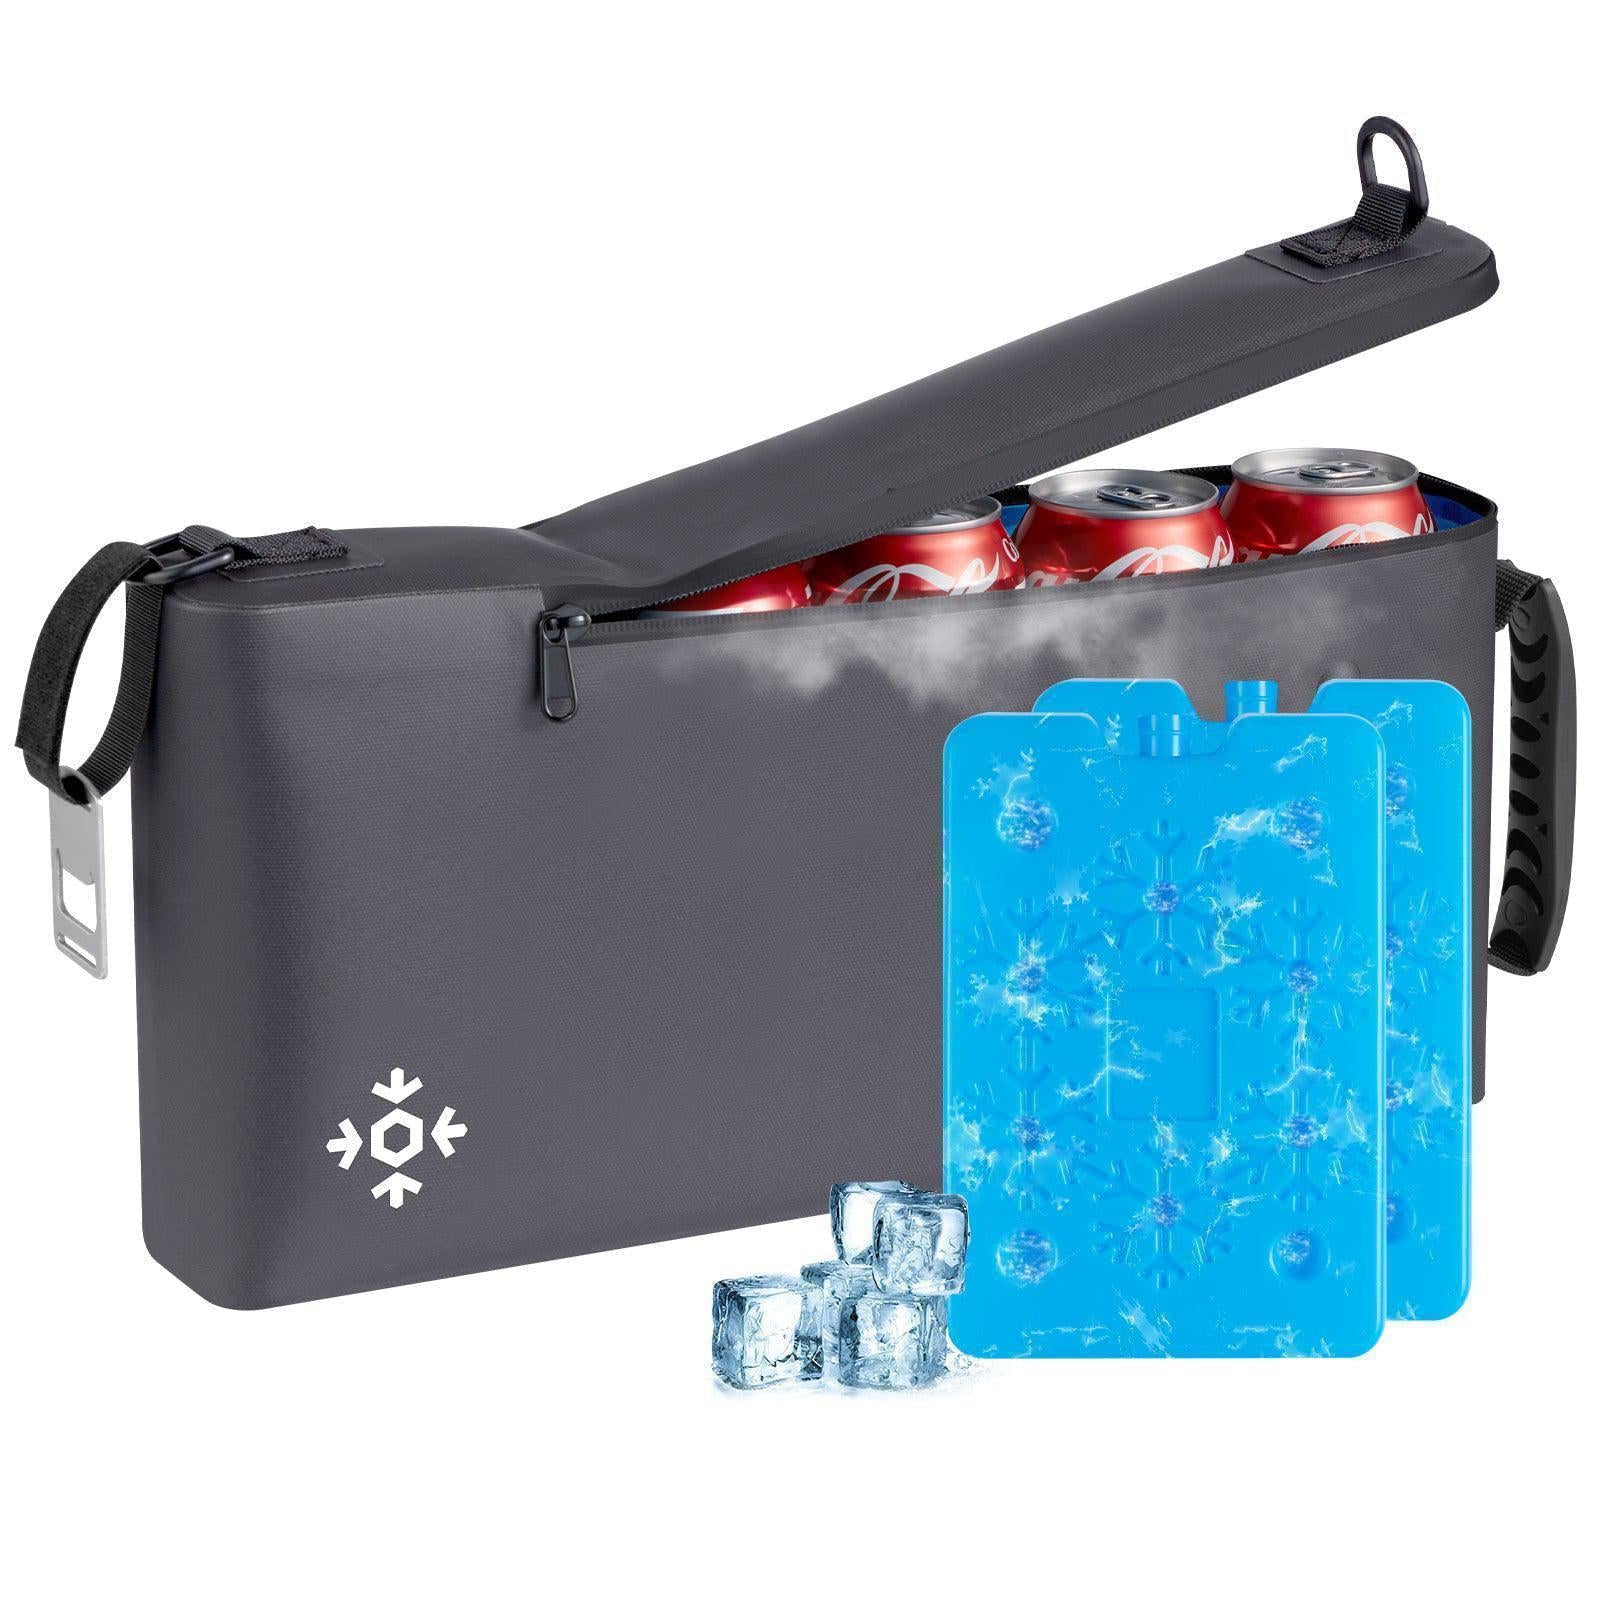 NEW ! ICECO Soft Cooler Bag，Portable Golf Cooler Bag-Portable Golf Cooler Bag-www.icecofreezer.com